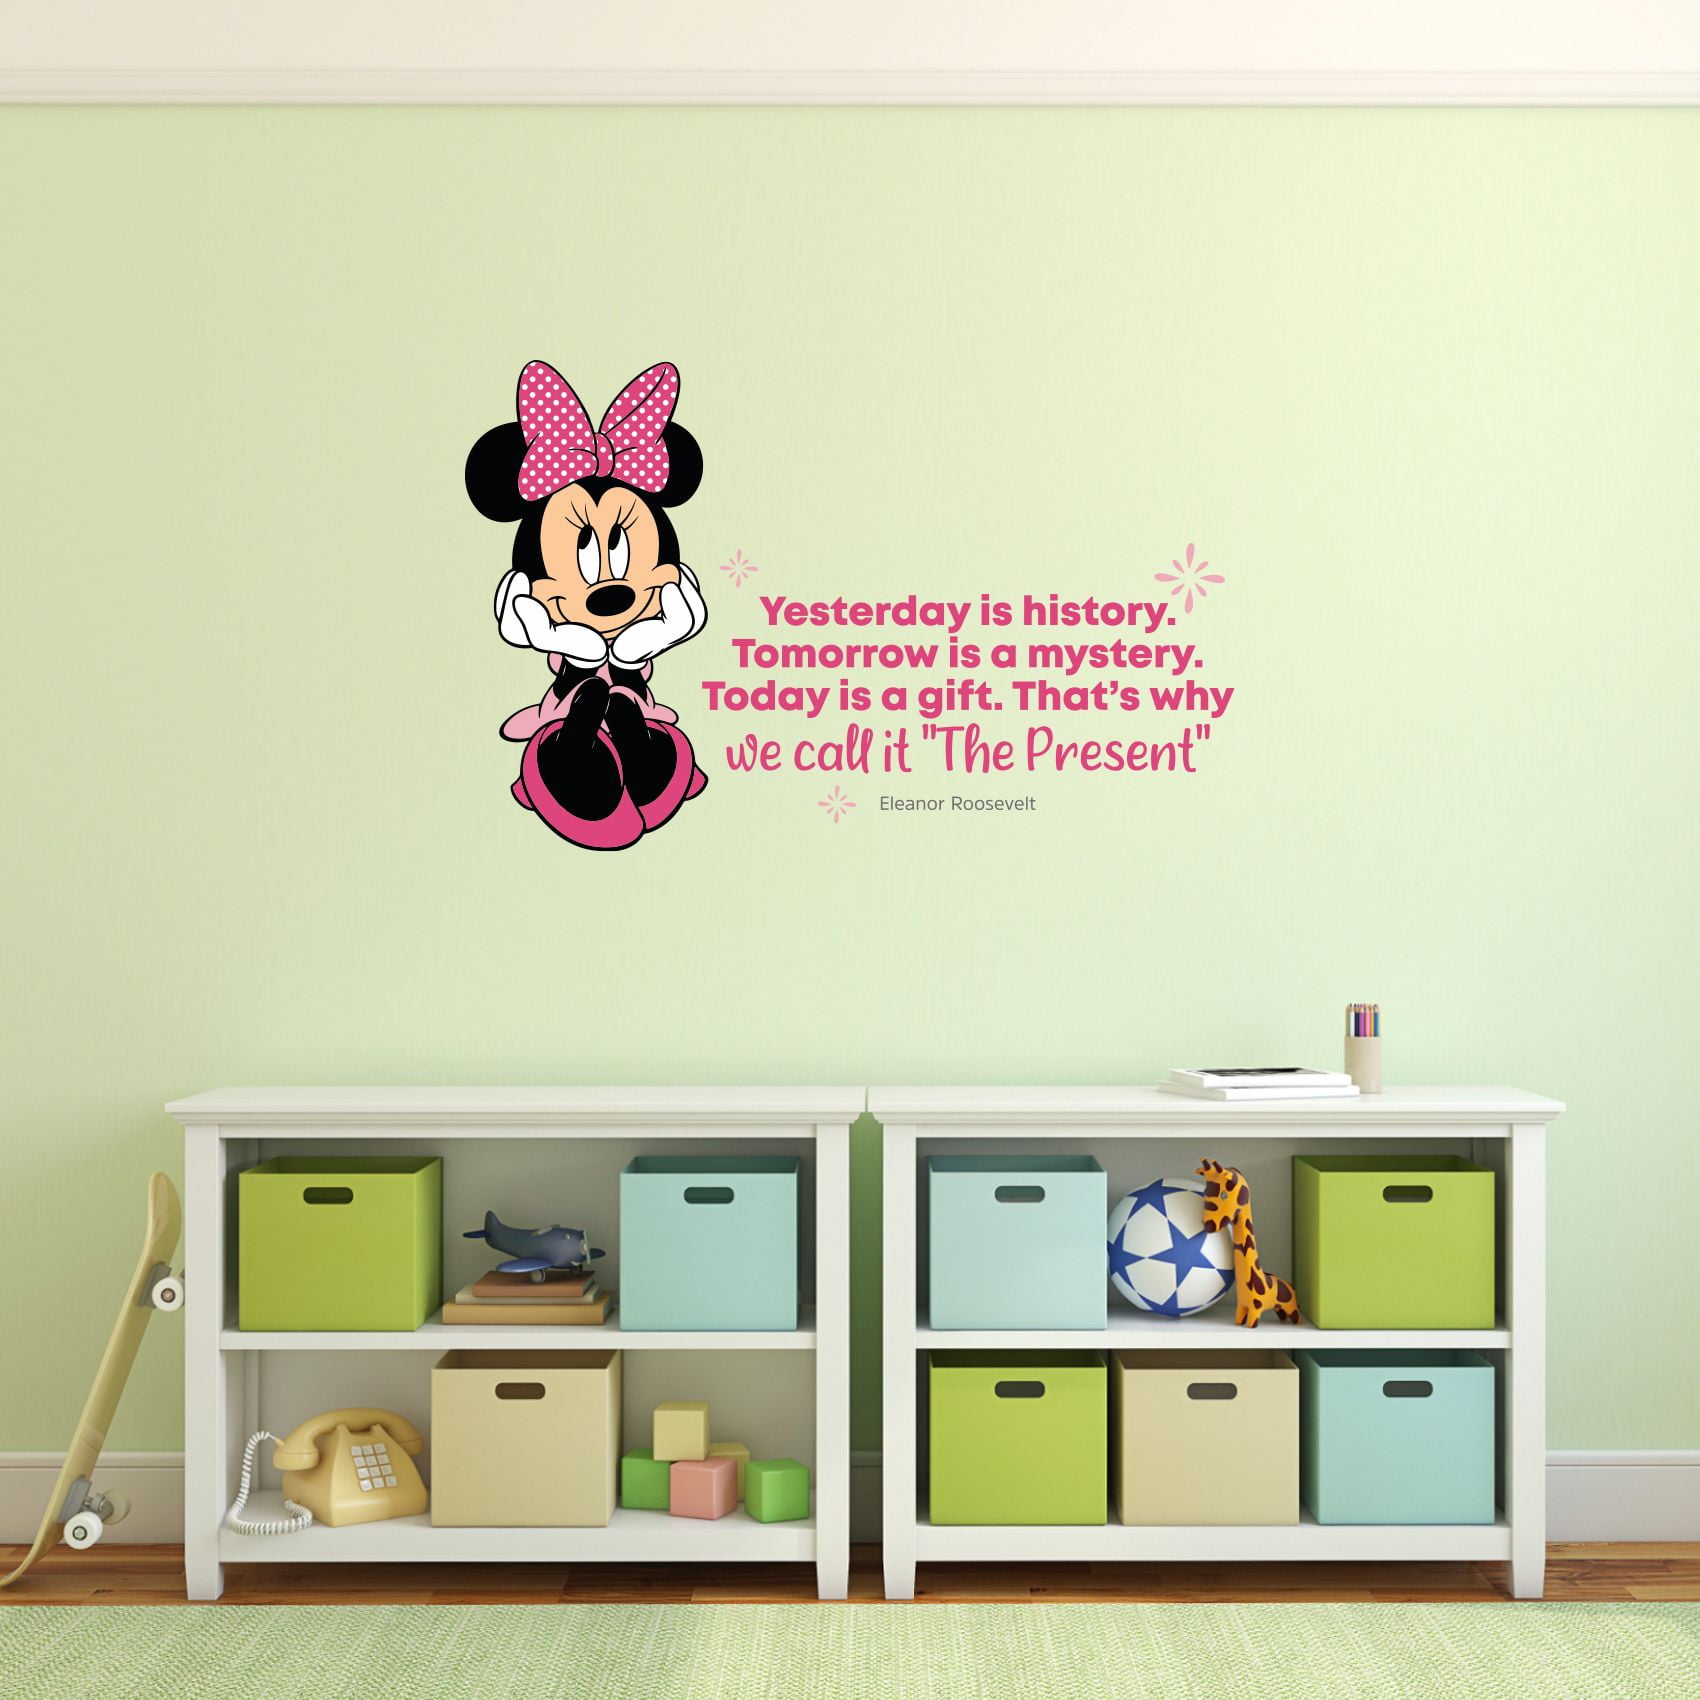 The Present Minnie Mouse Life Quote Cartoon Quotes Decors Wall Sticker Art  Design Decal for Girls Boys Kids Room Bedroom Nursery Kindergarten Home  Decor Stickers Wall Art Vinyl Decoration (27x30 inch) -